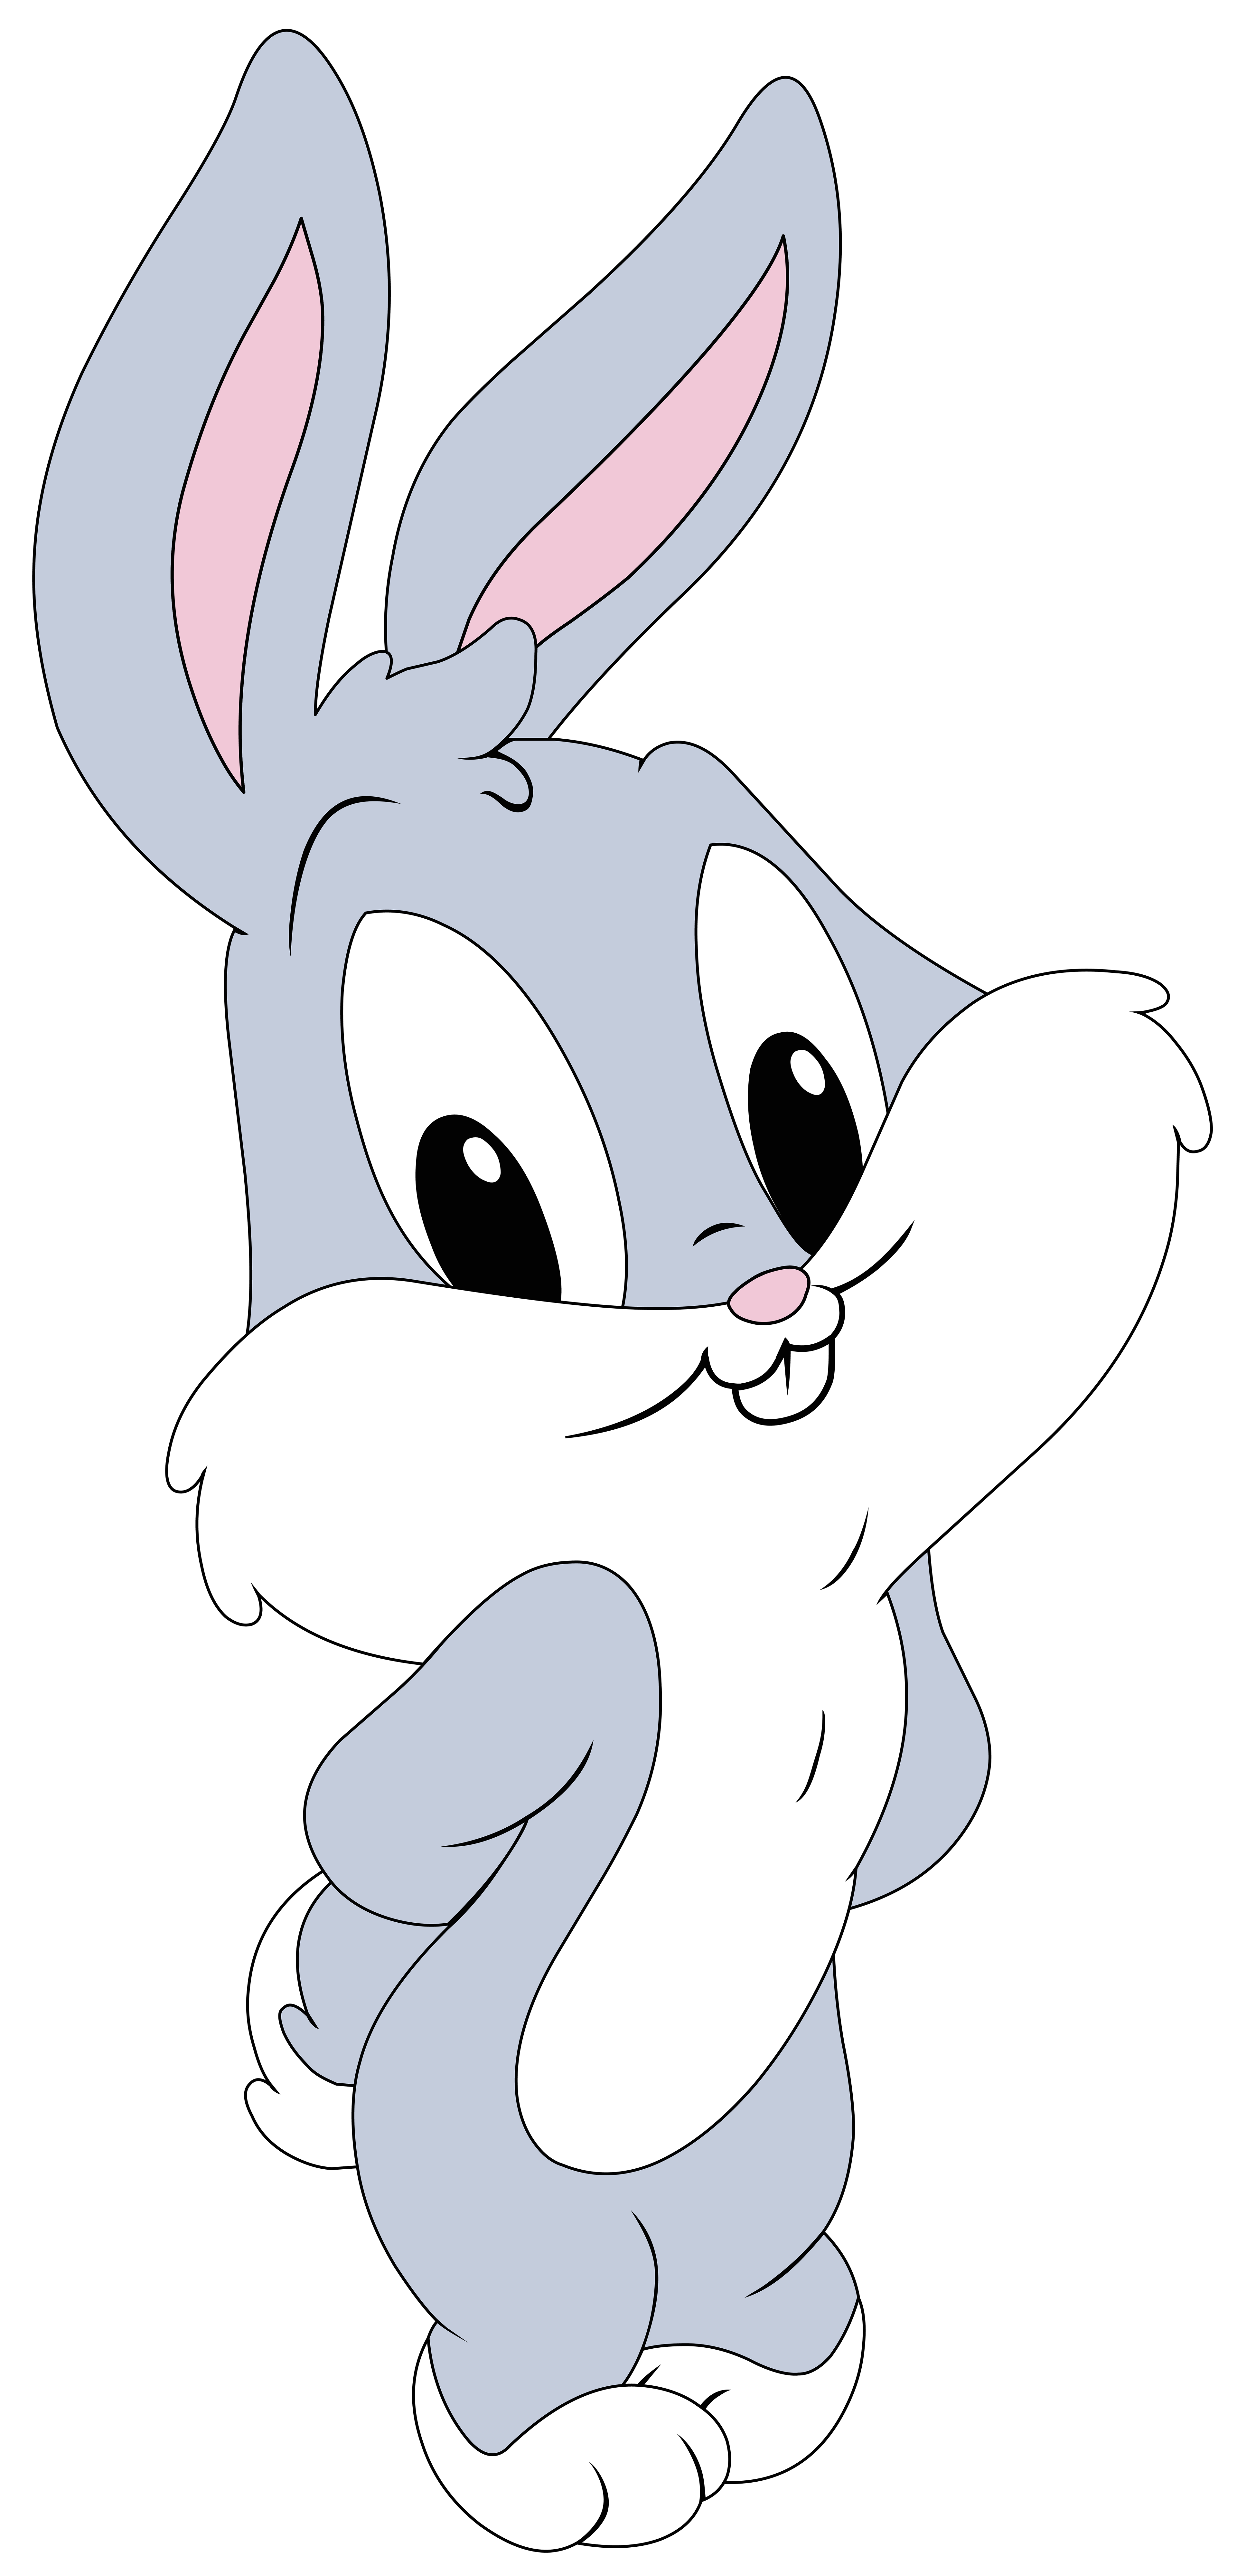 Bugs Bunny Baby Transparent PNG Clip Art Image.